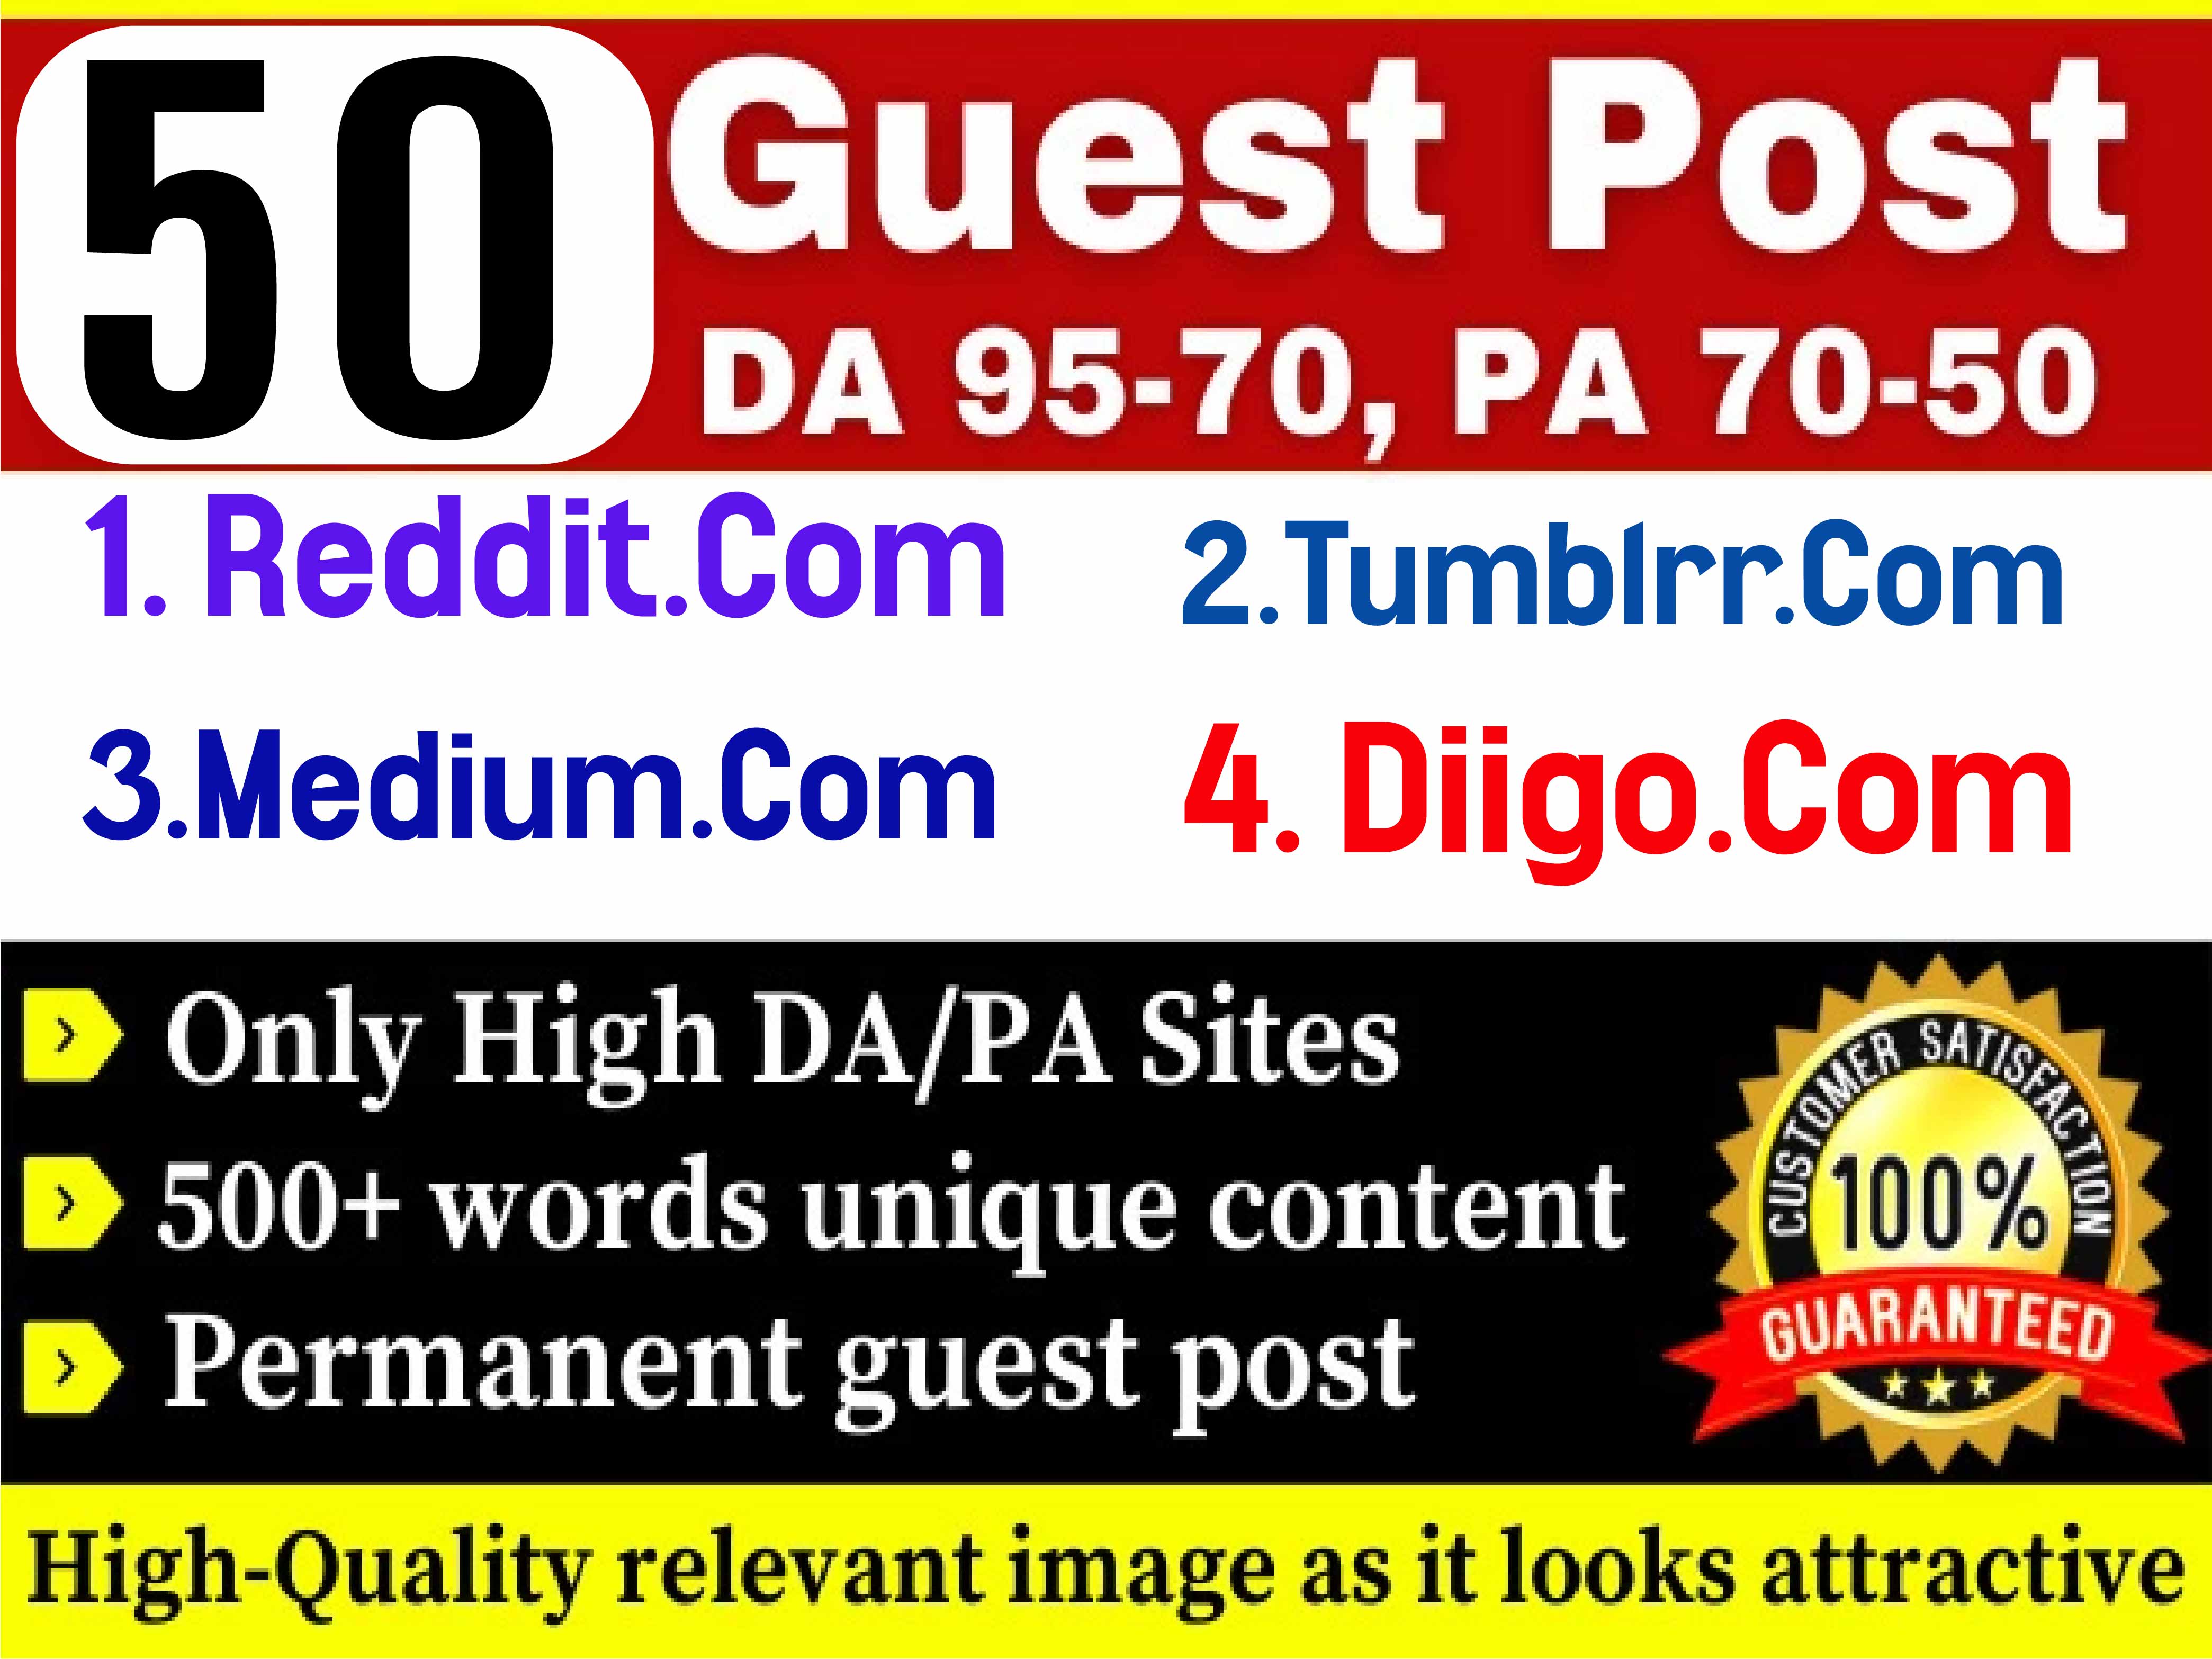 Create 50 Guest Post high-quality Backlinks with DA 79-95 contextual backlinks 2022